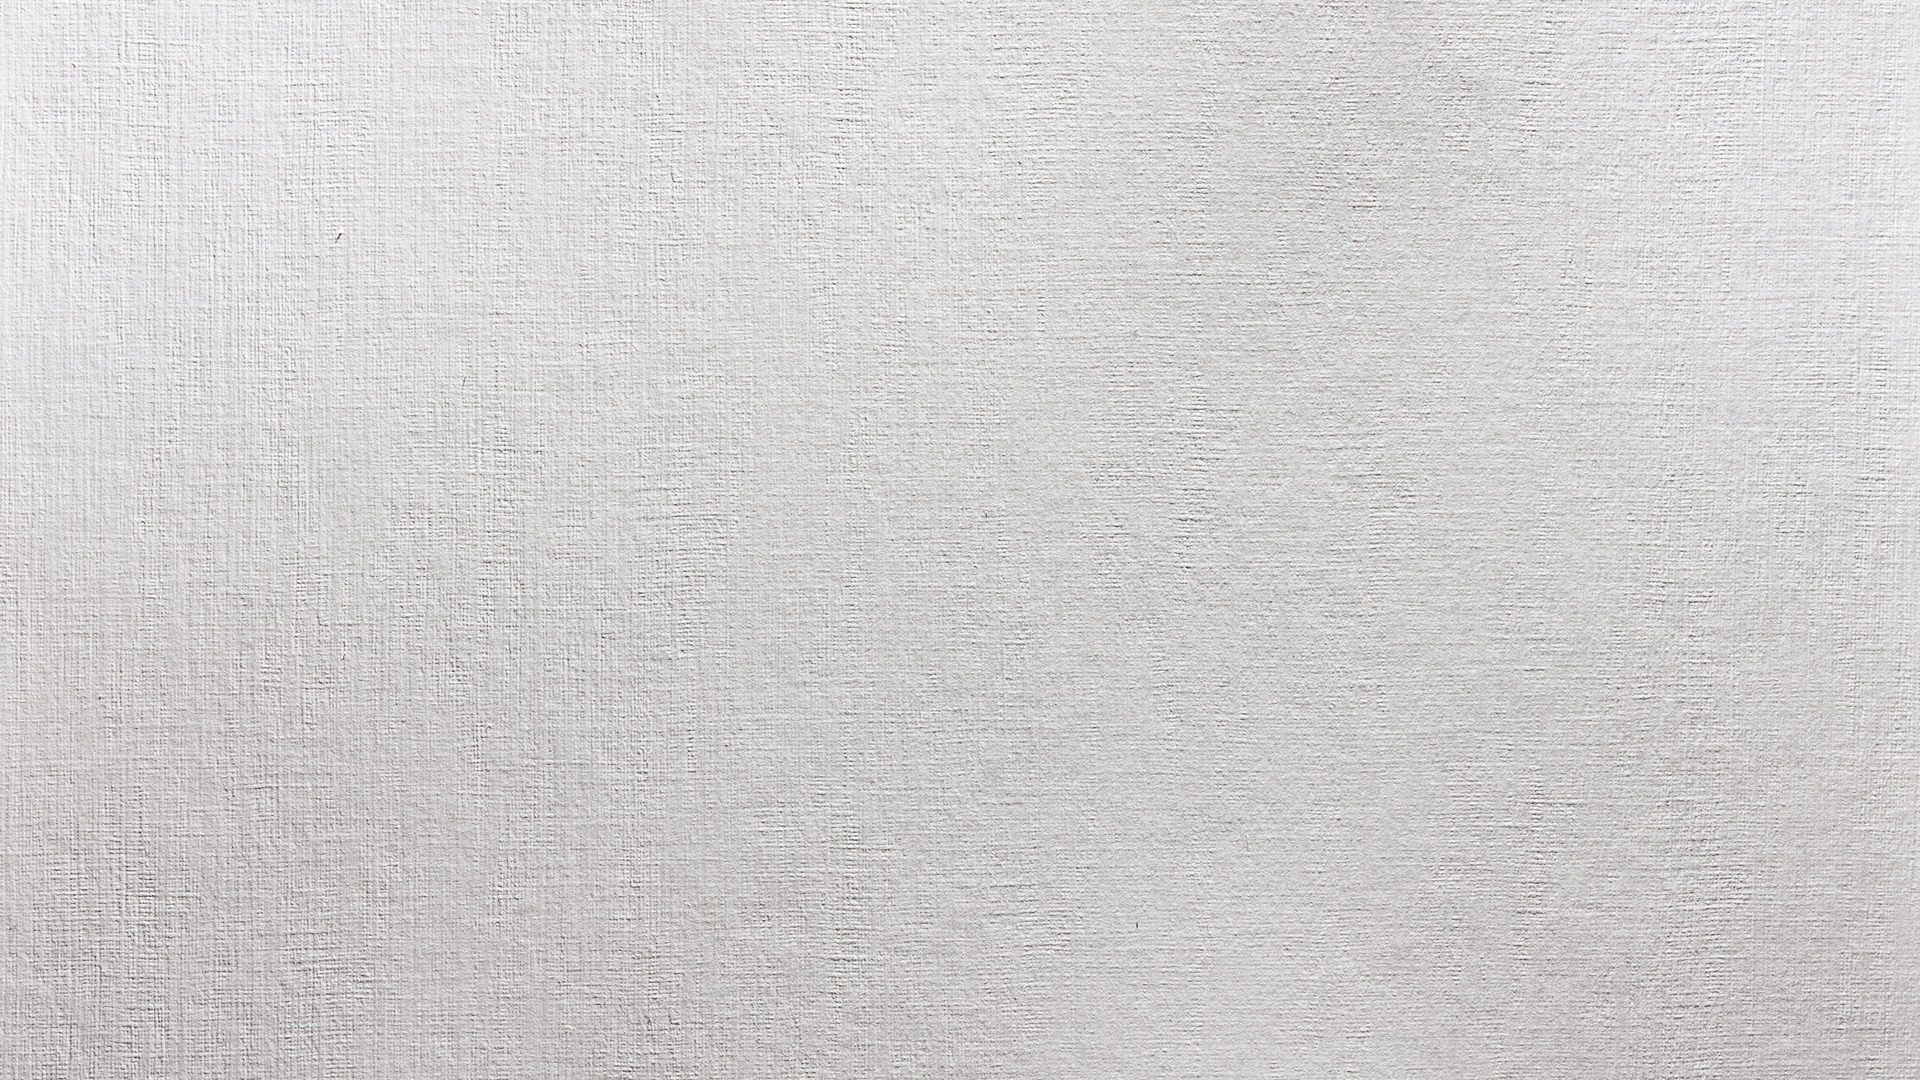 natural-paper-background-texture-hd-5a0b